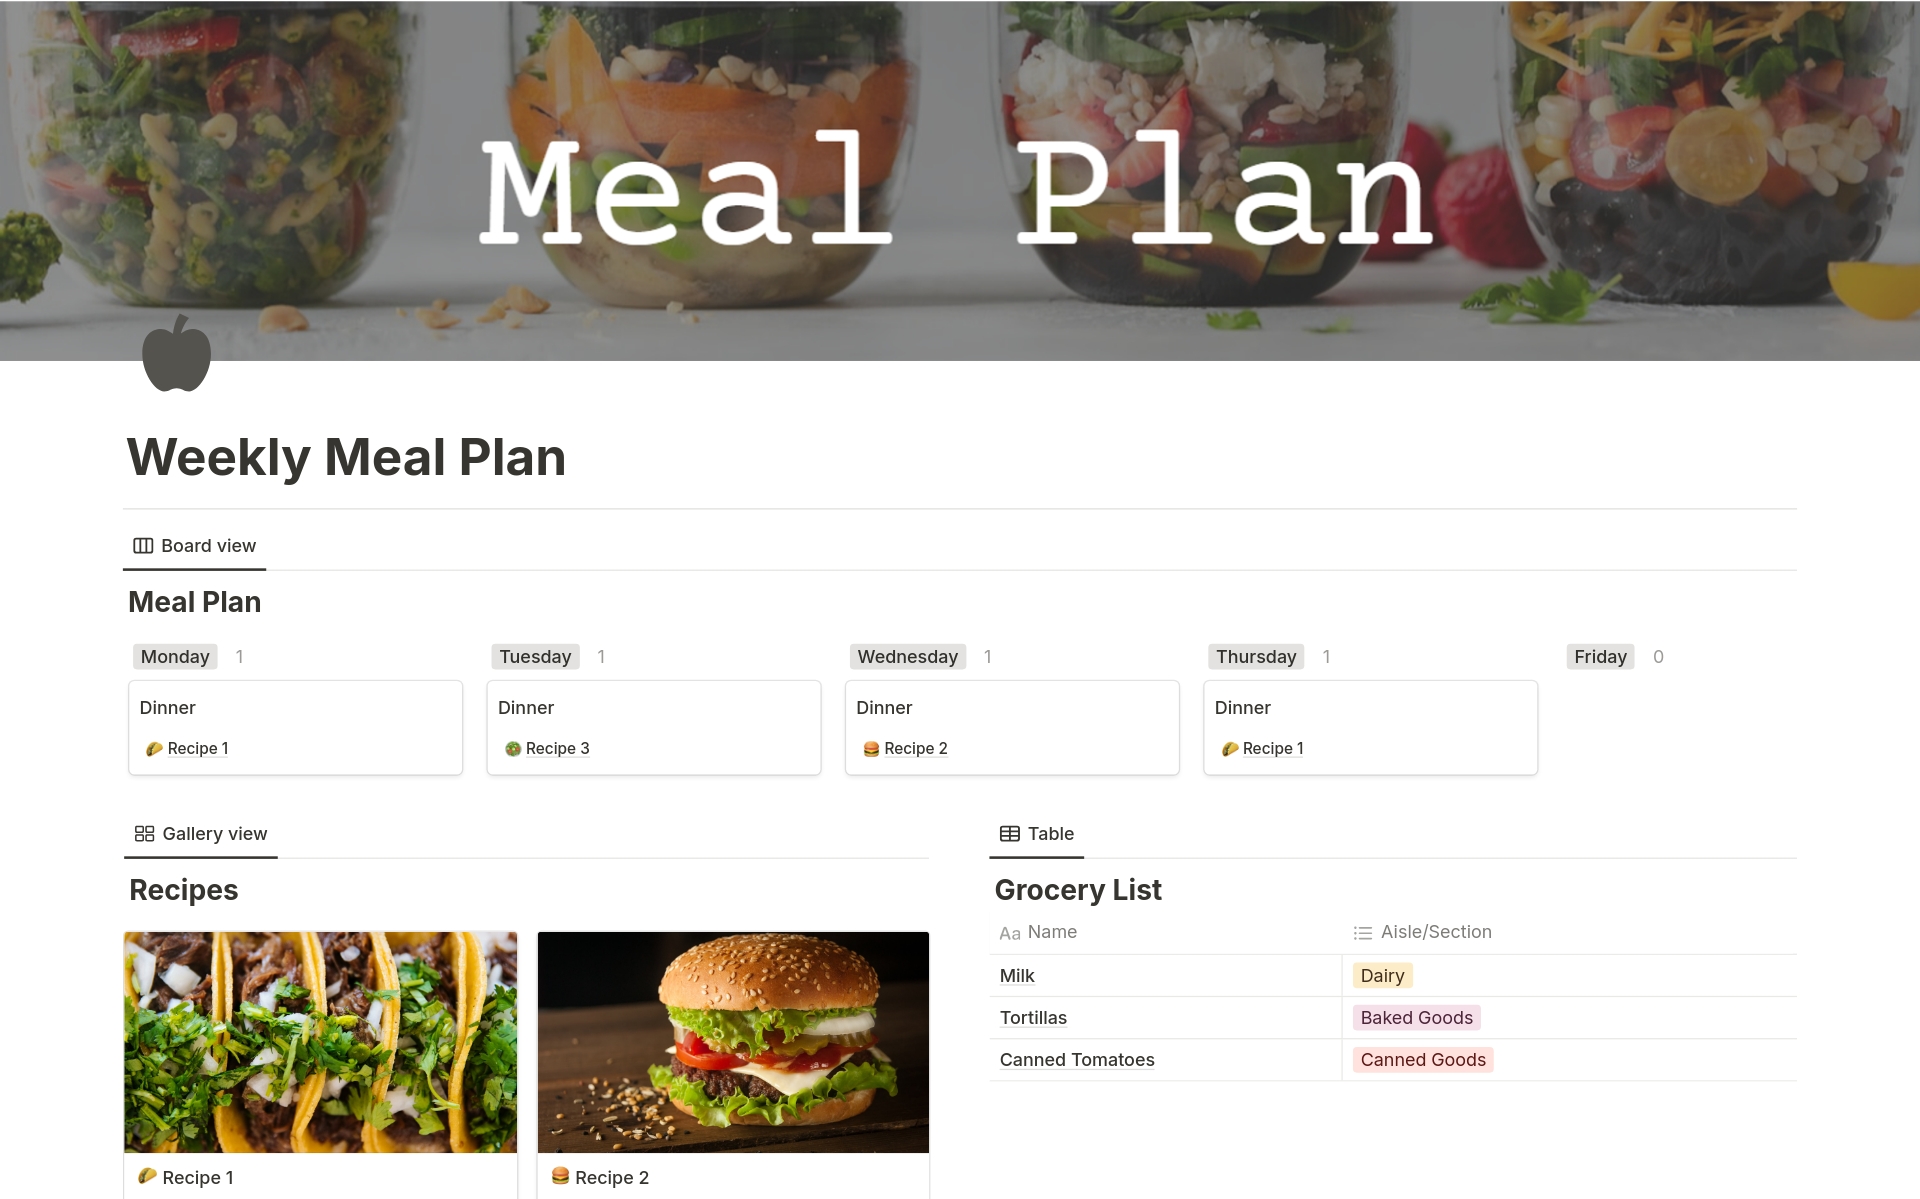 Easy to use meal planner that includes a spot for your recipes and grocery list.